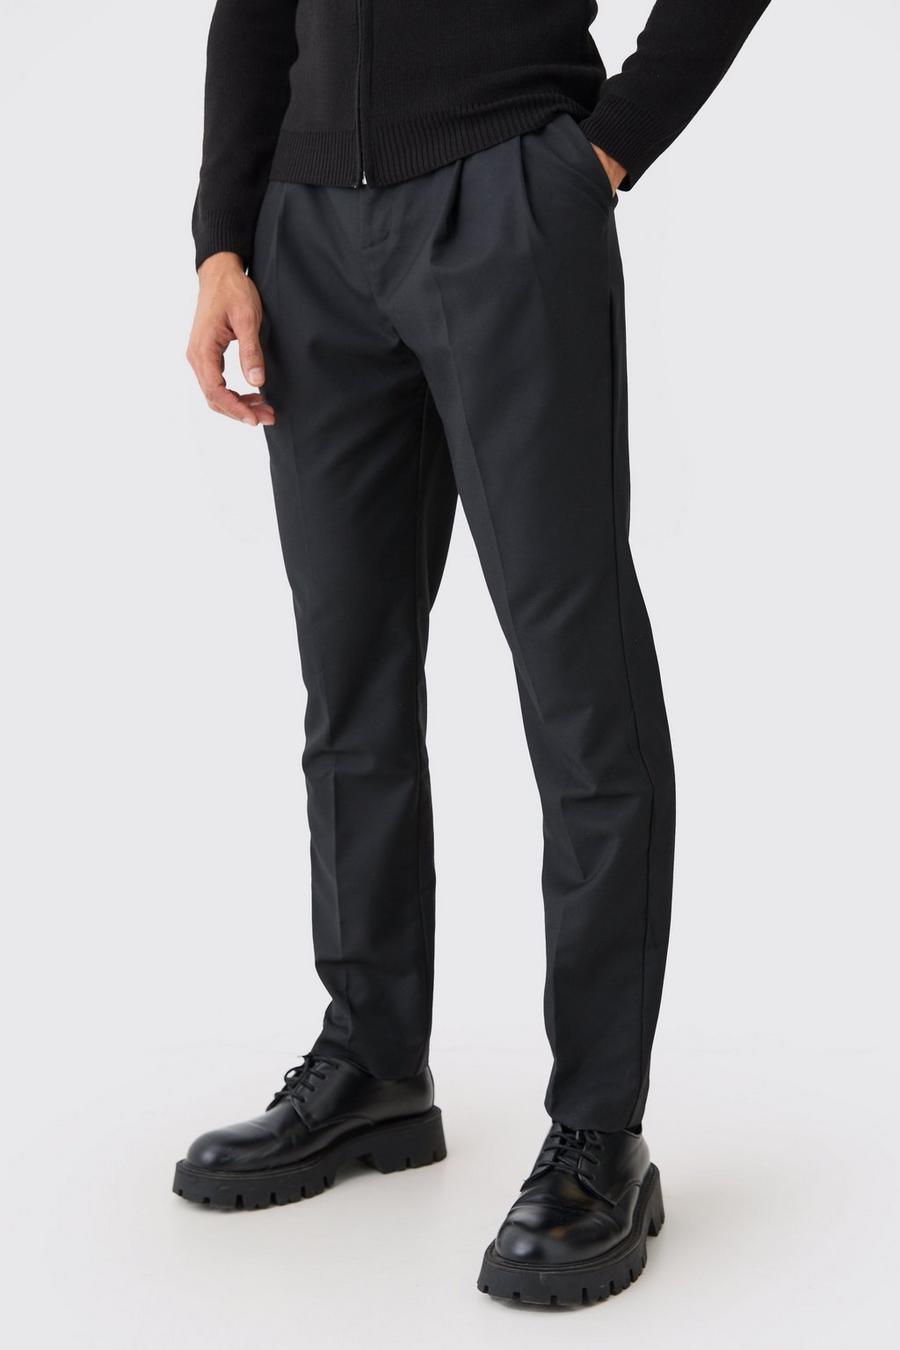 Black Pleat Front Tailored Straight Leg Trousers